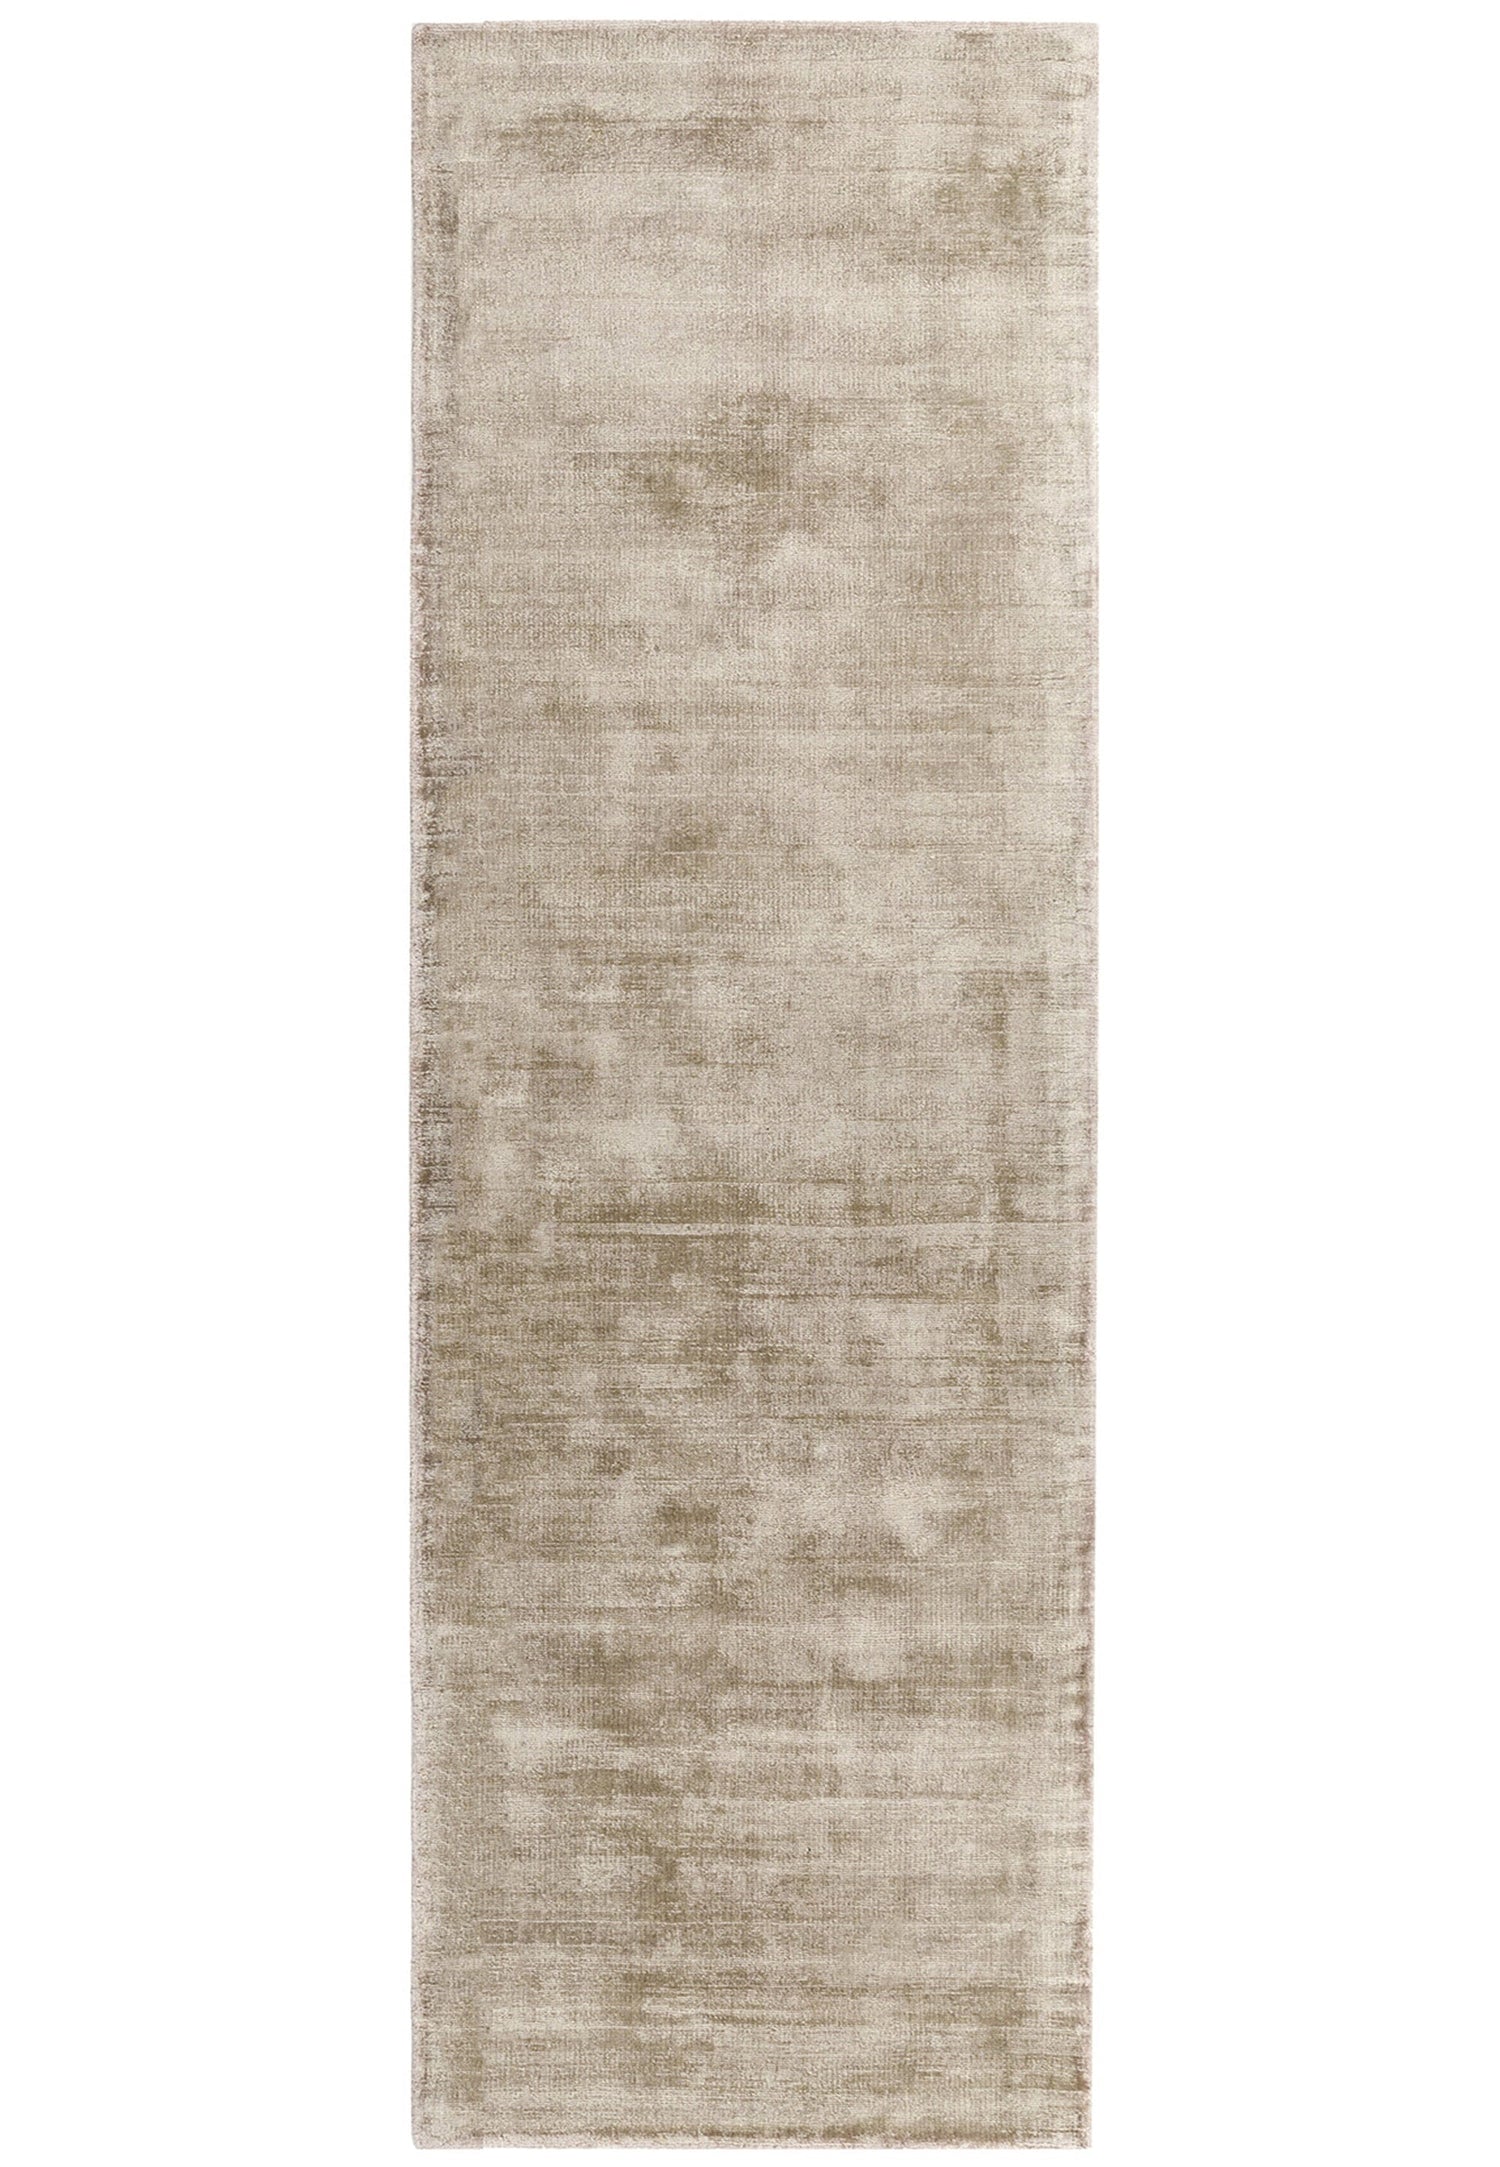  Asiatic Carpets-Asiatic Carpets Blade Hand Woven Rug Smoke - 120 x 170cm-Grey, Silver 501 